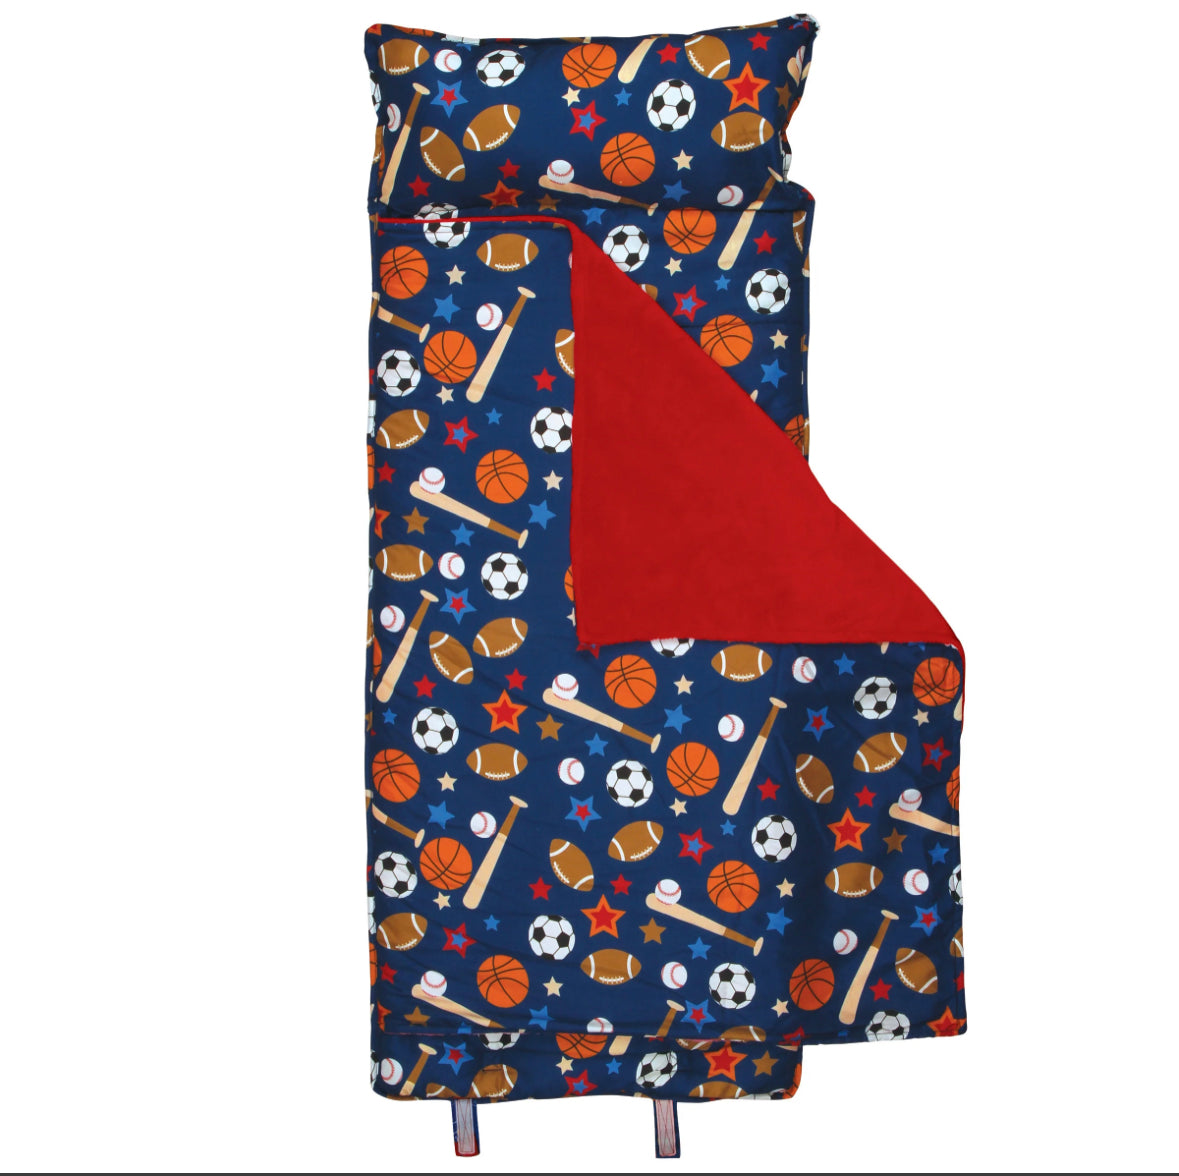 A Stephen Joseph sports themed Nap Mat - Sports with a red and blue blanket.